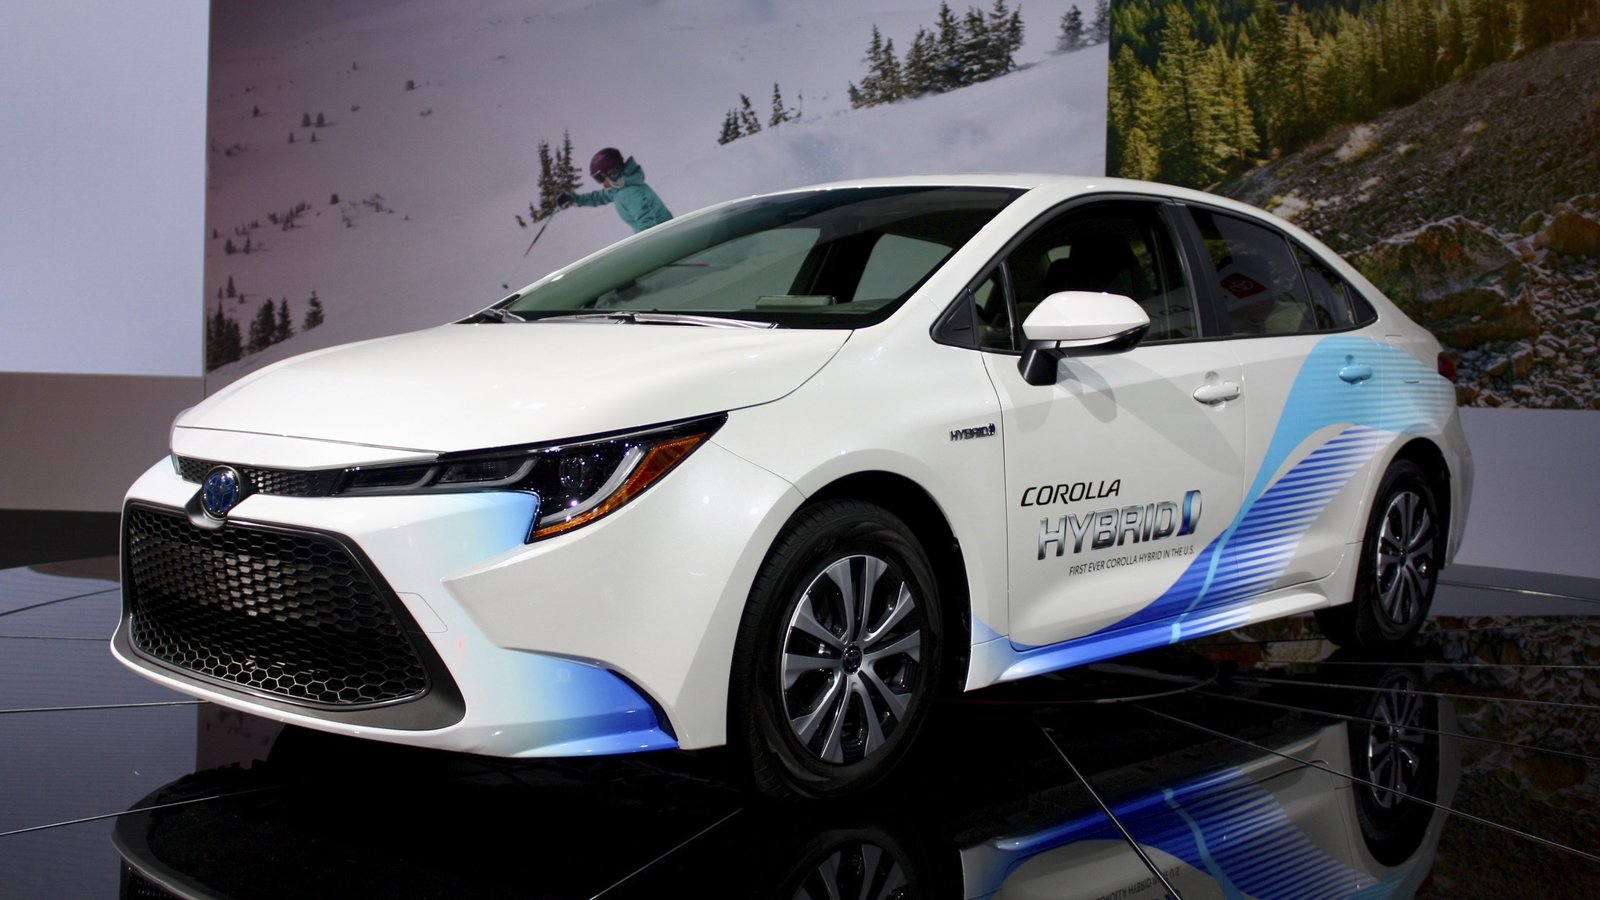 The 2020 Toyota Corolla Hybrid Gives You Prius Fuel Economy Without The Weird Hatchback Design